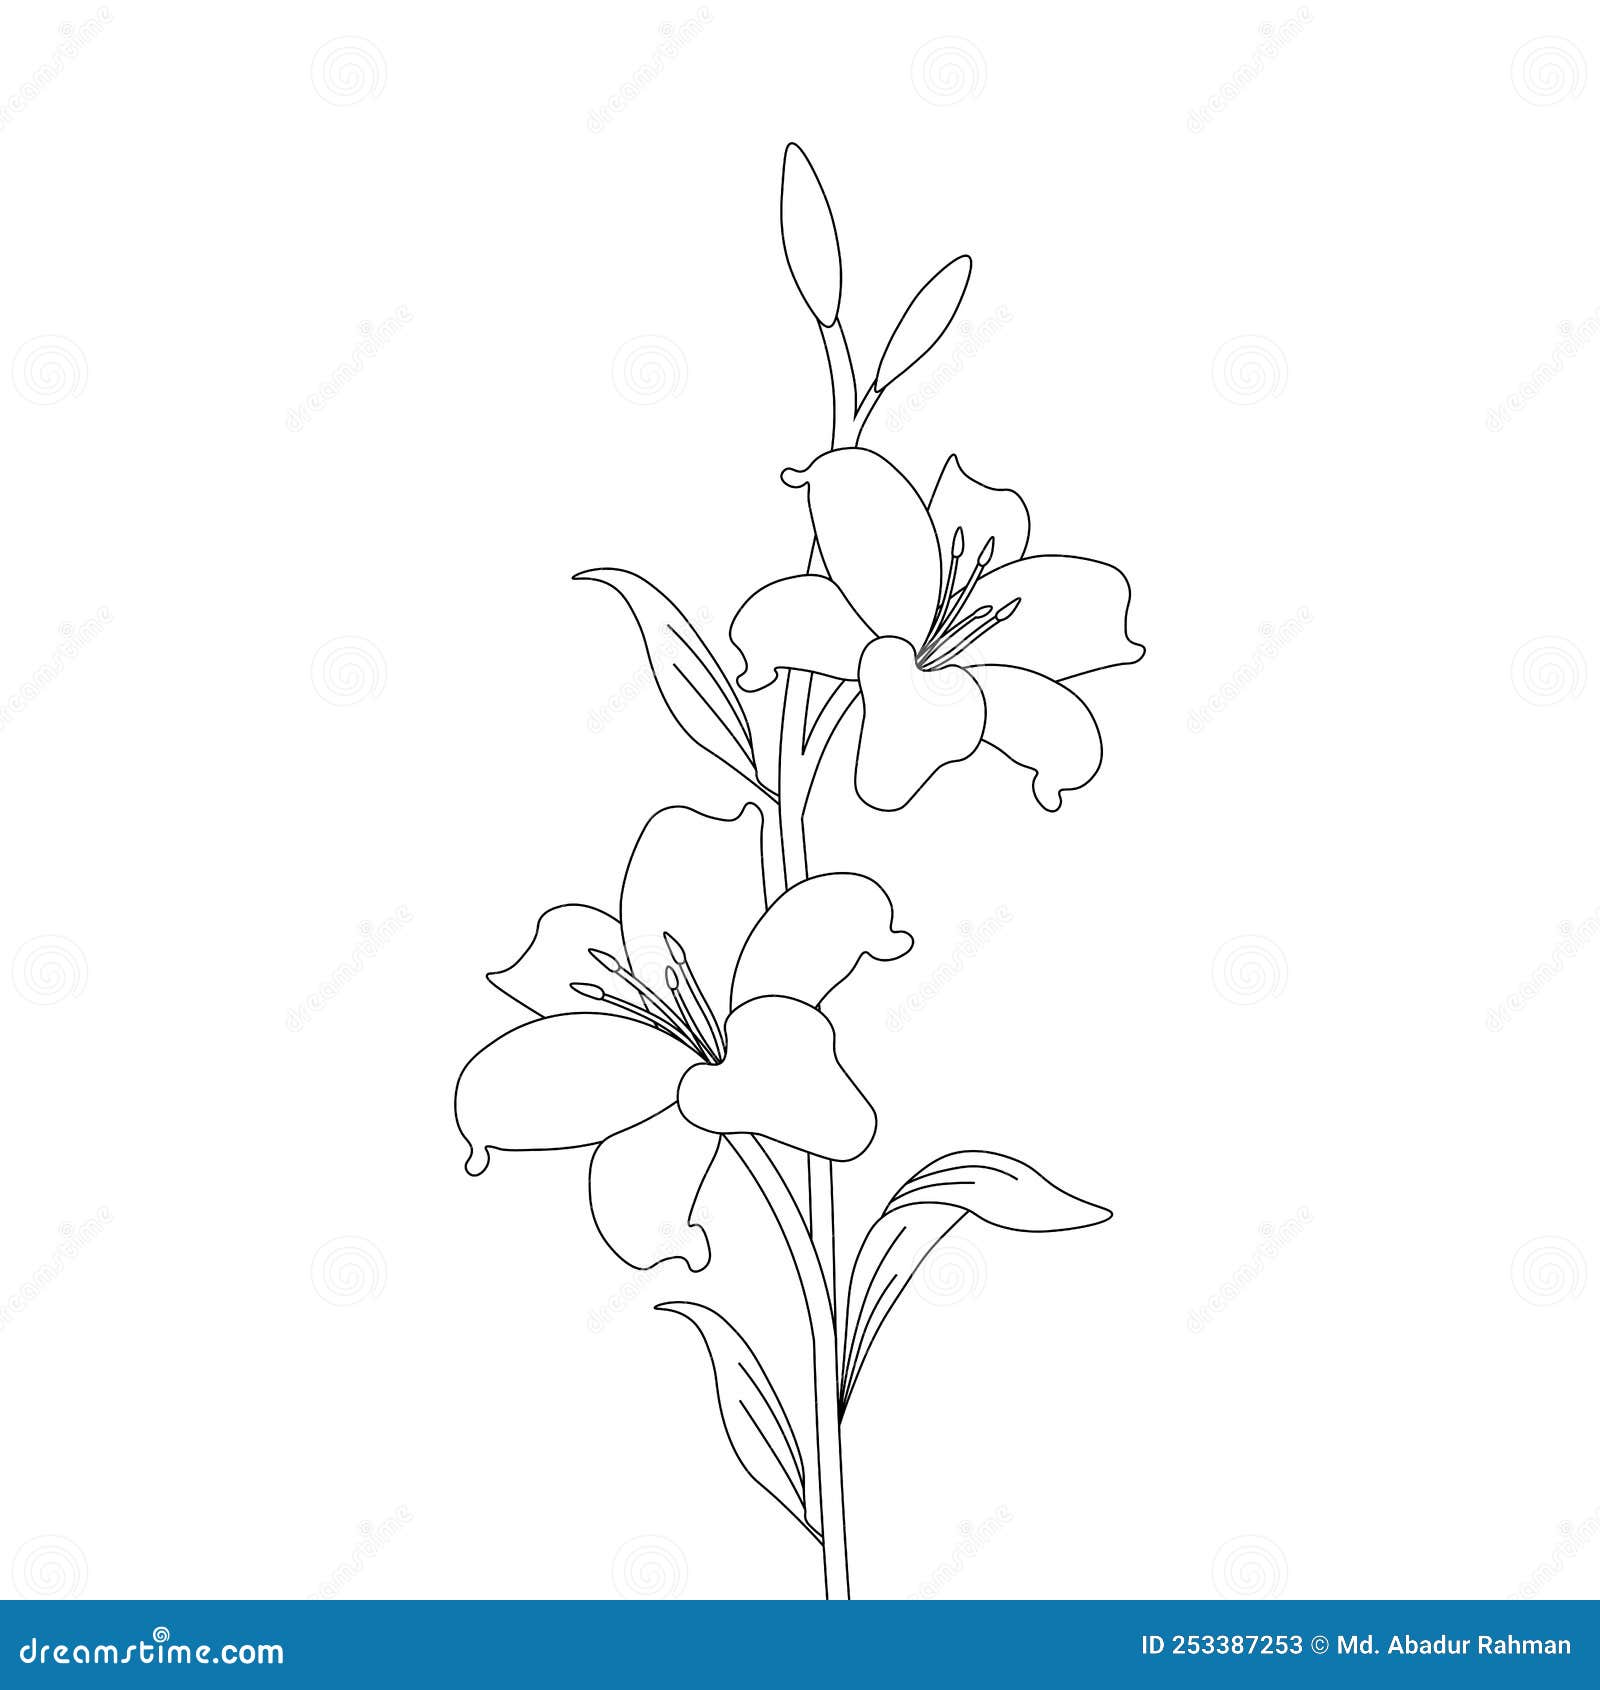 Lily Flower Coloring Page Drawing for Kids Activities Art with Line ...